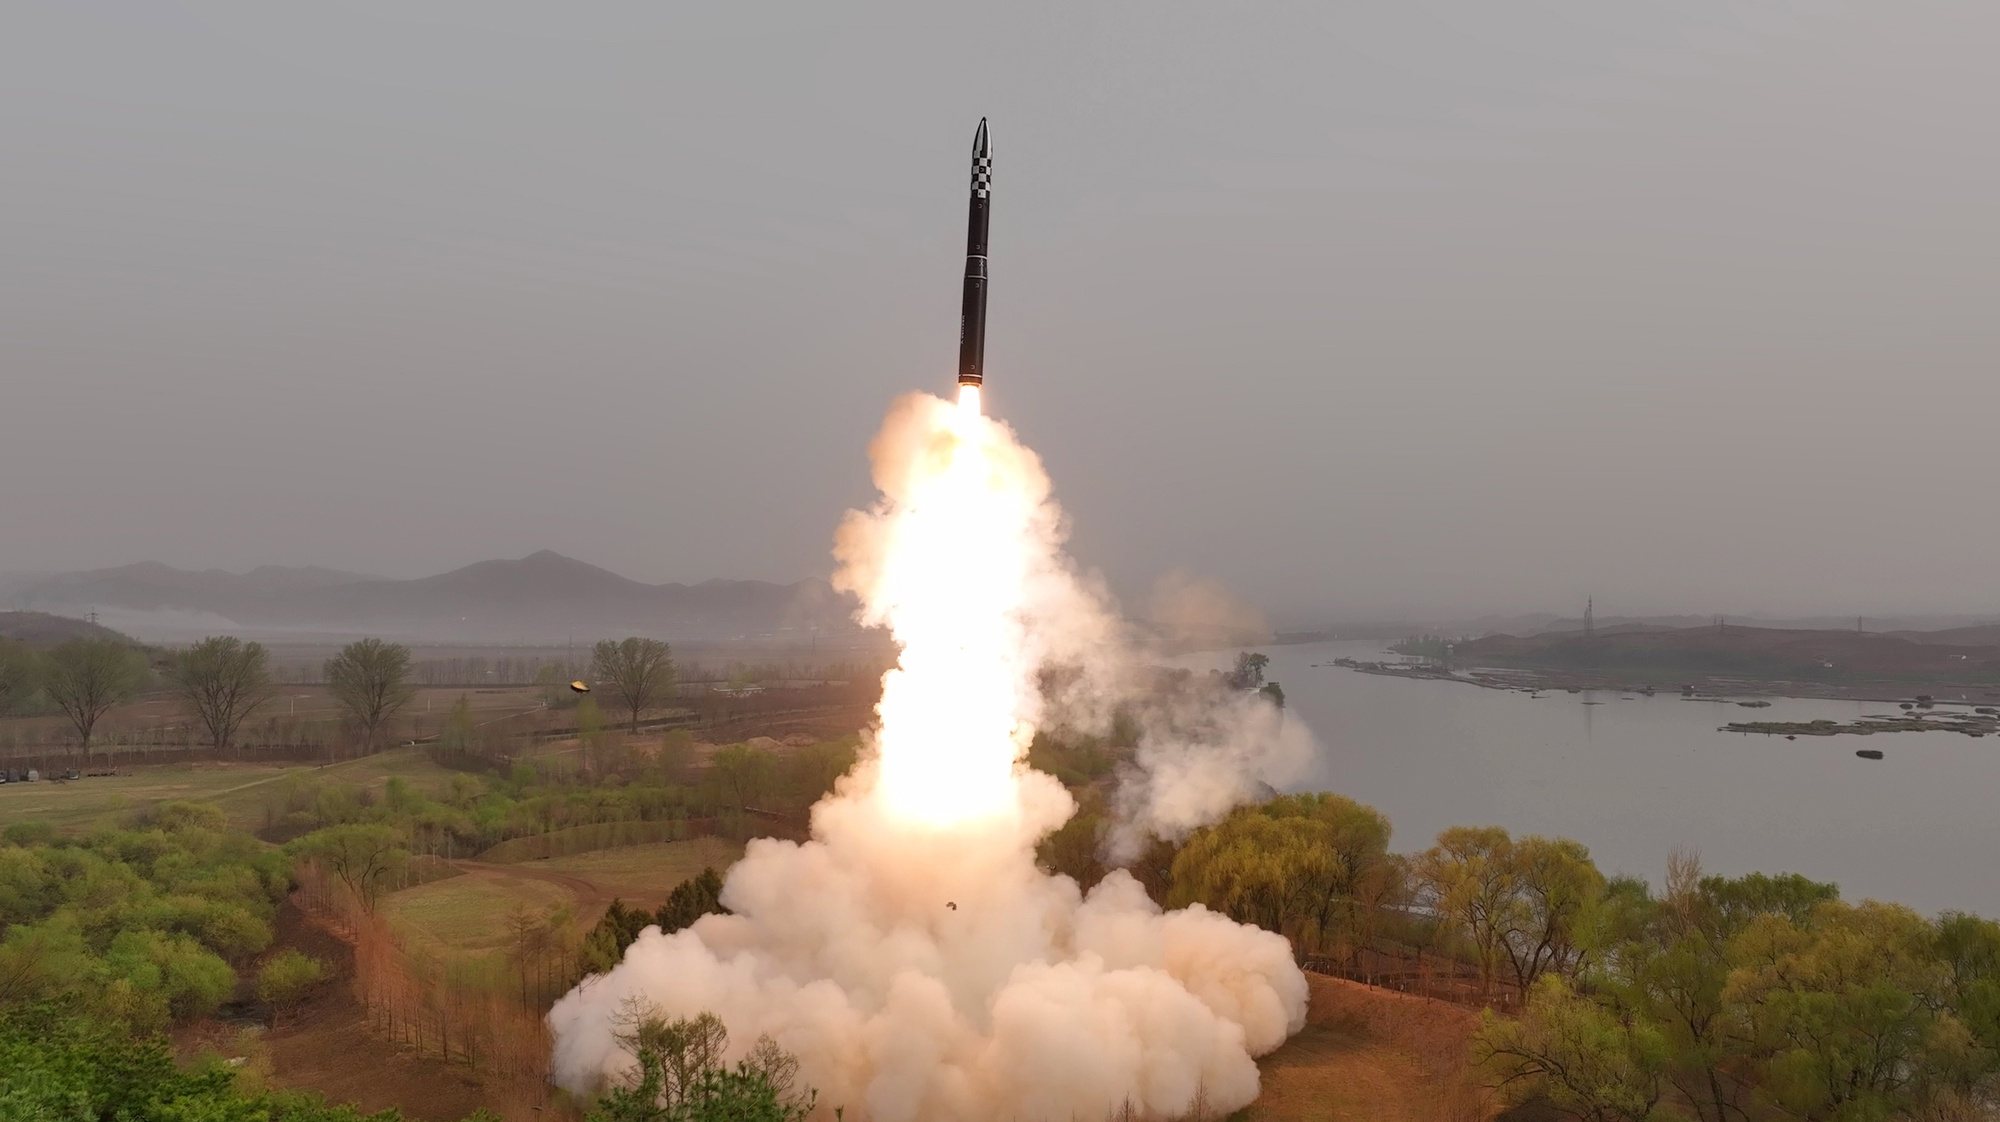 epa10571728 A photo released by the official North Korean Central News Agency (KCNA) shows the test firing of a new solid-fuel Hwasong-18 intercontinental ballistic missile (ICBM) at an undisclosed location in North Korea, 13 April 2023 (Issued 14 April 2023). According to KCNA, a new-type of ICBM Hwasongpho-18 that will serve as an &#039;important war deterrent&#039;, was test-fired on 13 April where the first stage safely landed in the waters 10 kilometres off the Hodo Peninsula in Kumya County, South Hamgyong Province and the second stage in the waters 335 kilometres east of Orang County, North Hamgyong Province.  EPA/KCNA   EDITORIAL USE ONLY  EDITORIAL USE ONLY